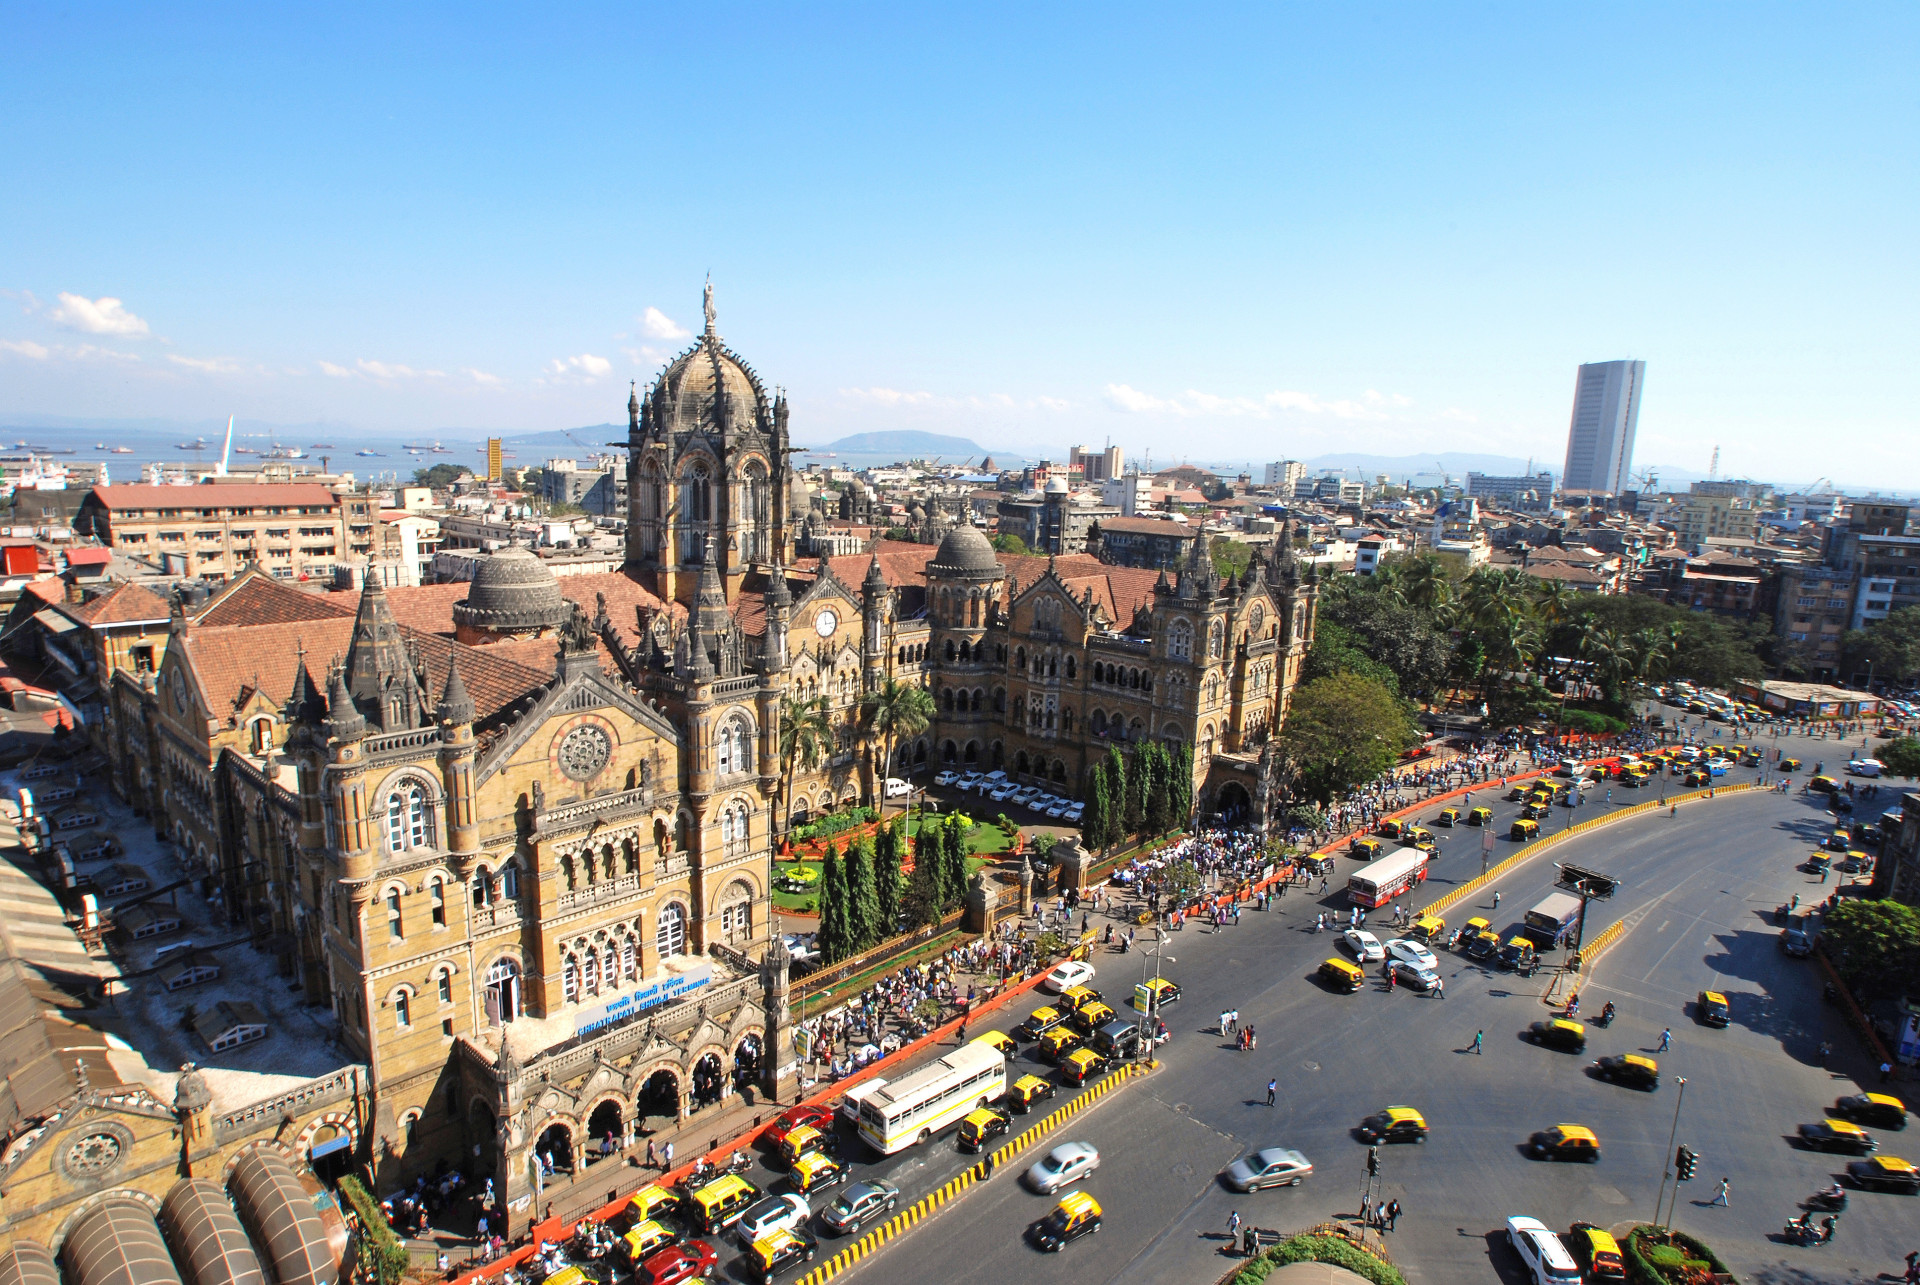 Mumbai is India's largest metropolis, with more than 14 million inhabitants.<p><a href="https://www.msn.com/en-in/community/channel/vid-7xx8mnucu55yw63we9va2gwr7uihbxwc68fxqp25x6tg4ftibpra?cvid=94631541bc0f4f89bfd59158d696ad7e">Follow us and access great exclusive content every day</a></p>